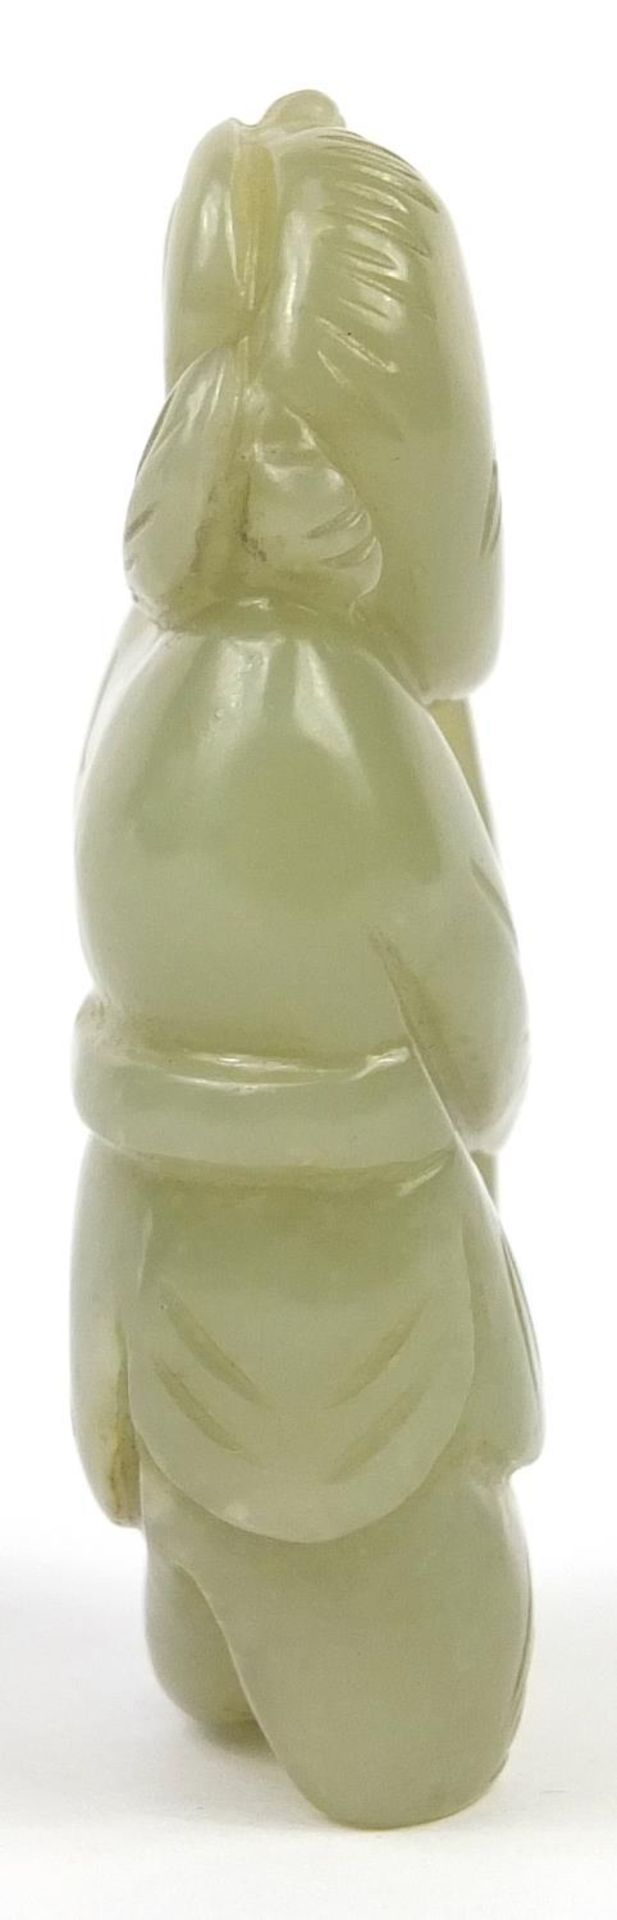 Chinese celadon jade carving of a boy, 7cm high - Image 5 of 7